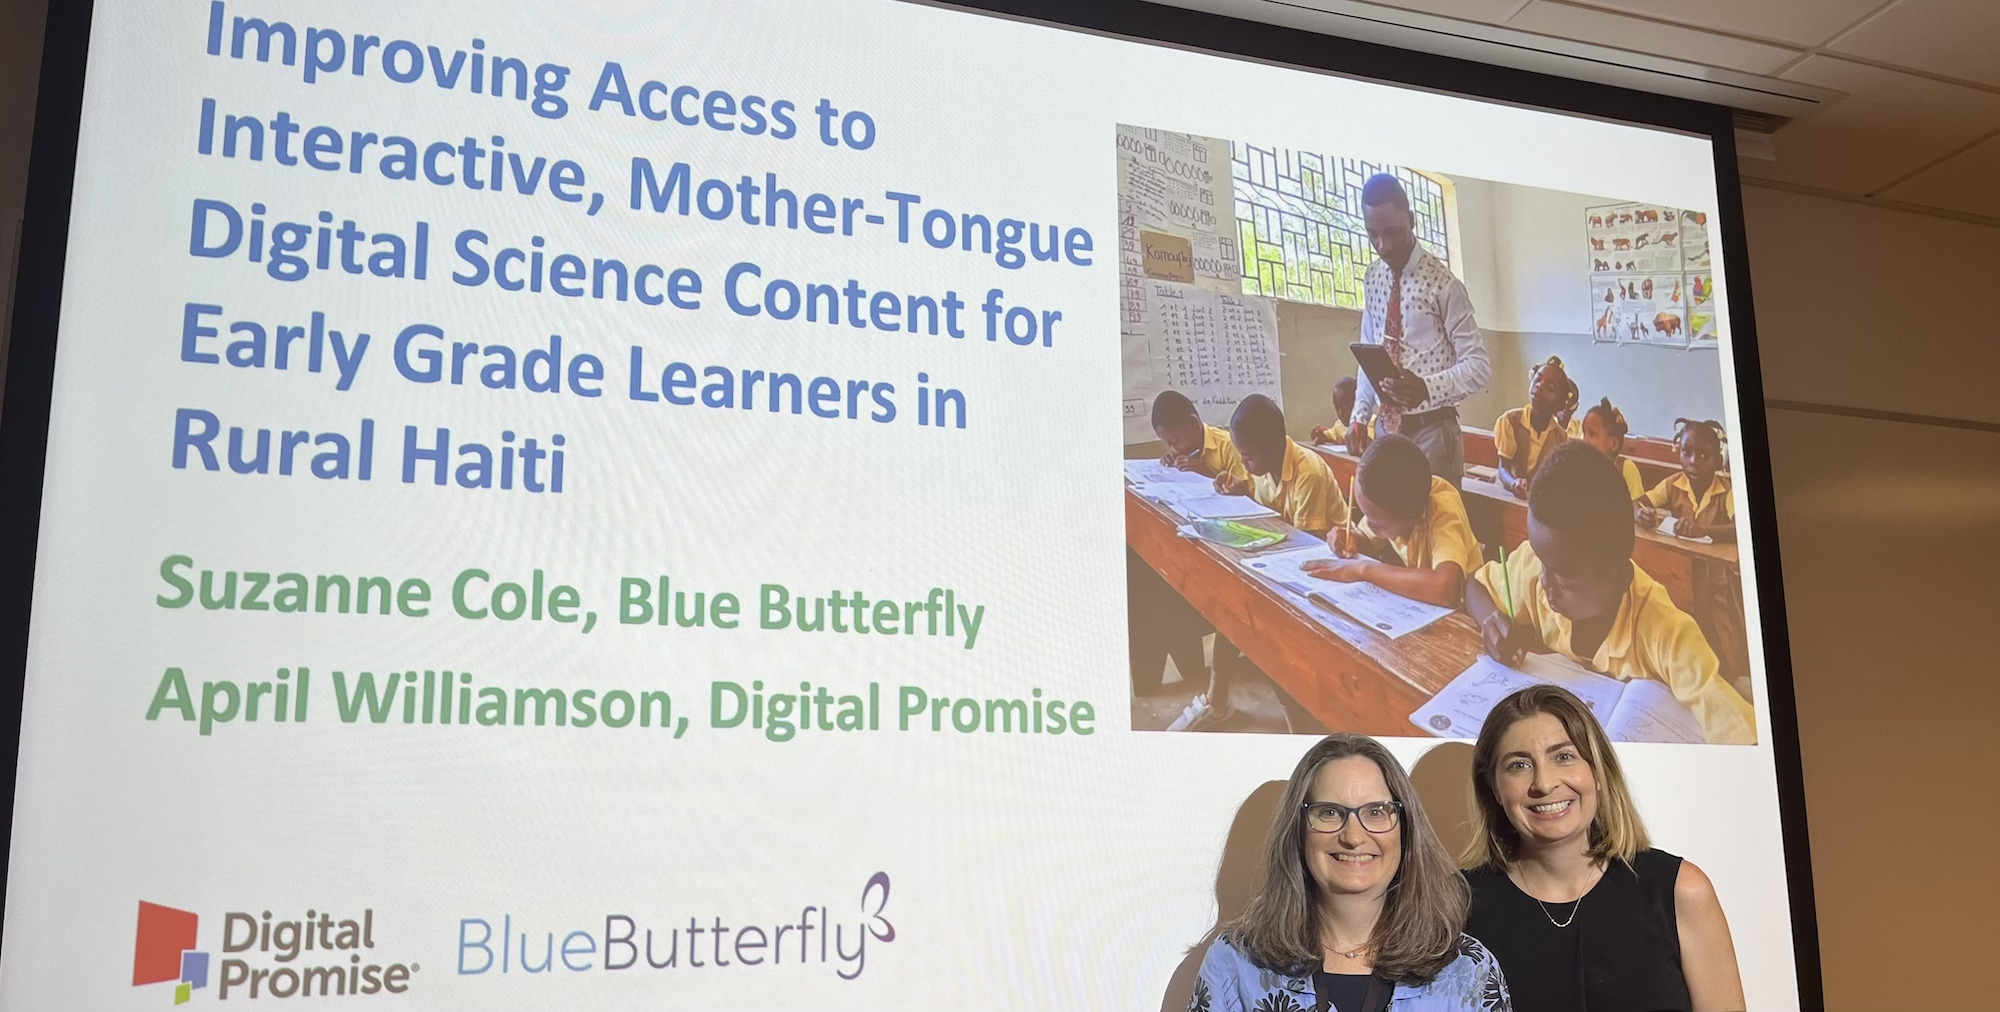 Suzanne Cole of Blue Butterfly and April Williamson of Digital Promise discuss their partnership to bring interactive, mother-tongue digital science content to Haitian primary schools.